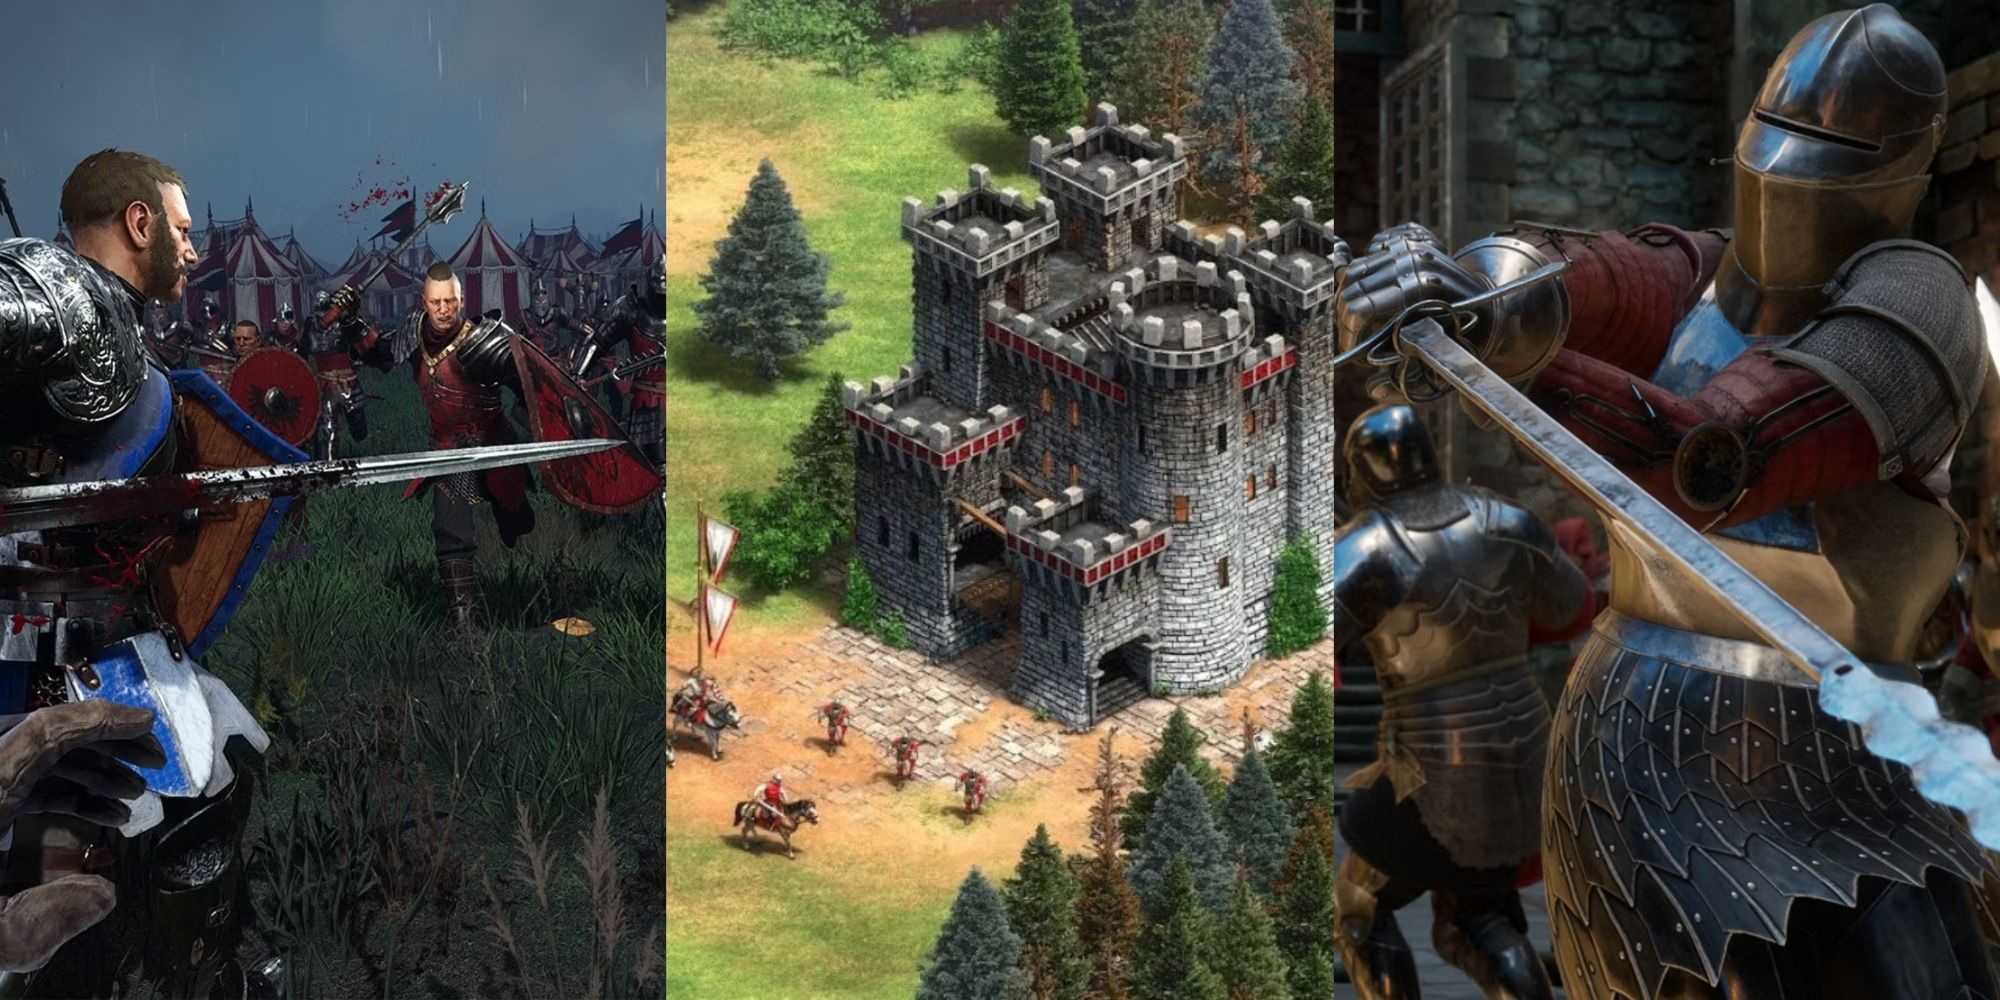  Chivalry 2, Age of Empires 2, and Mordhau